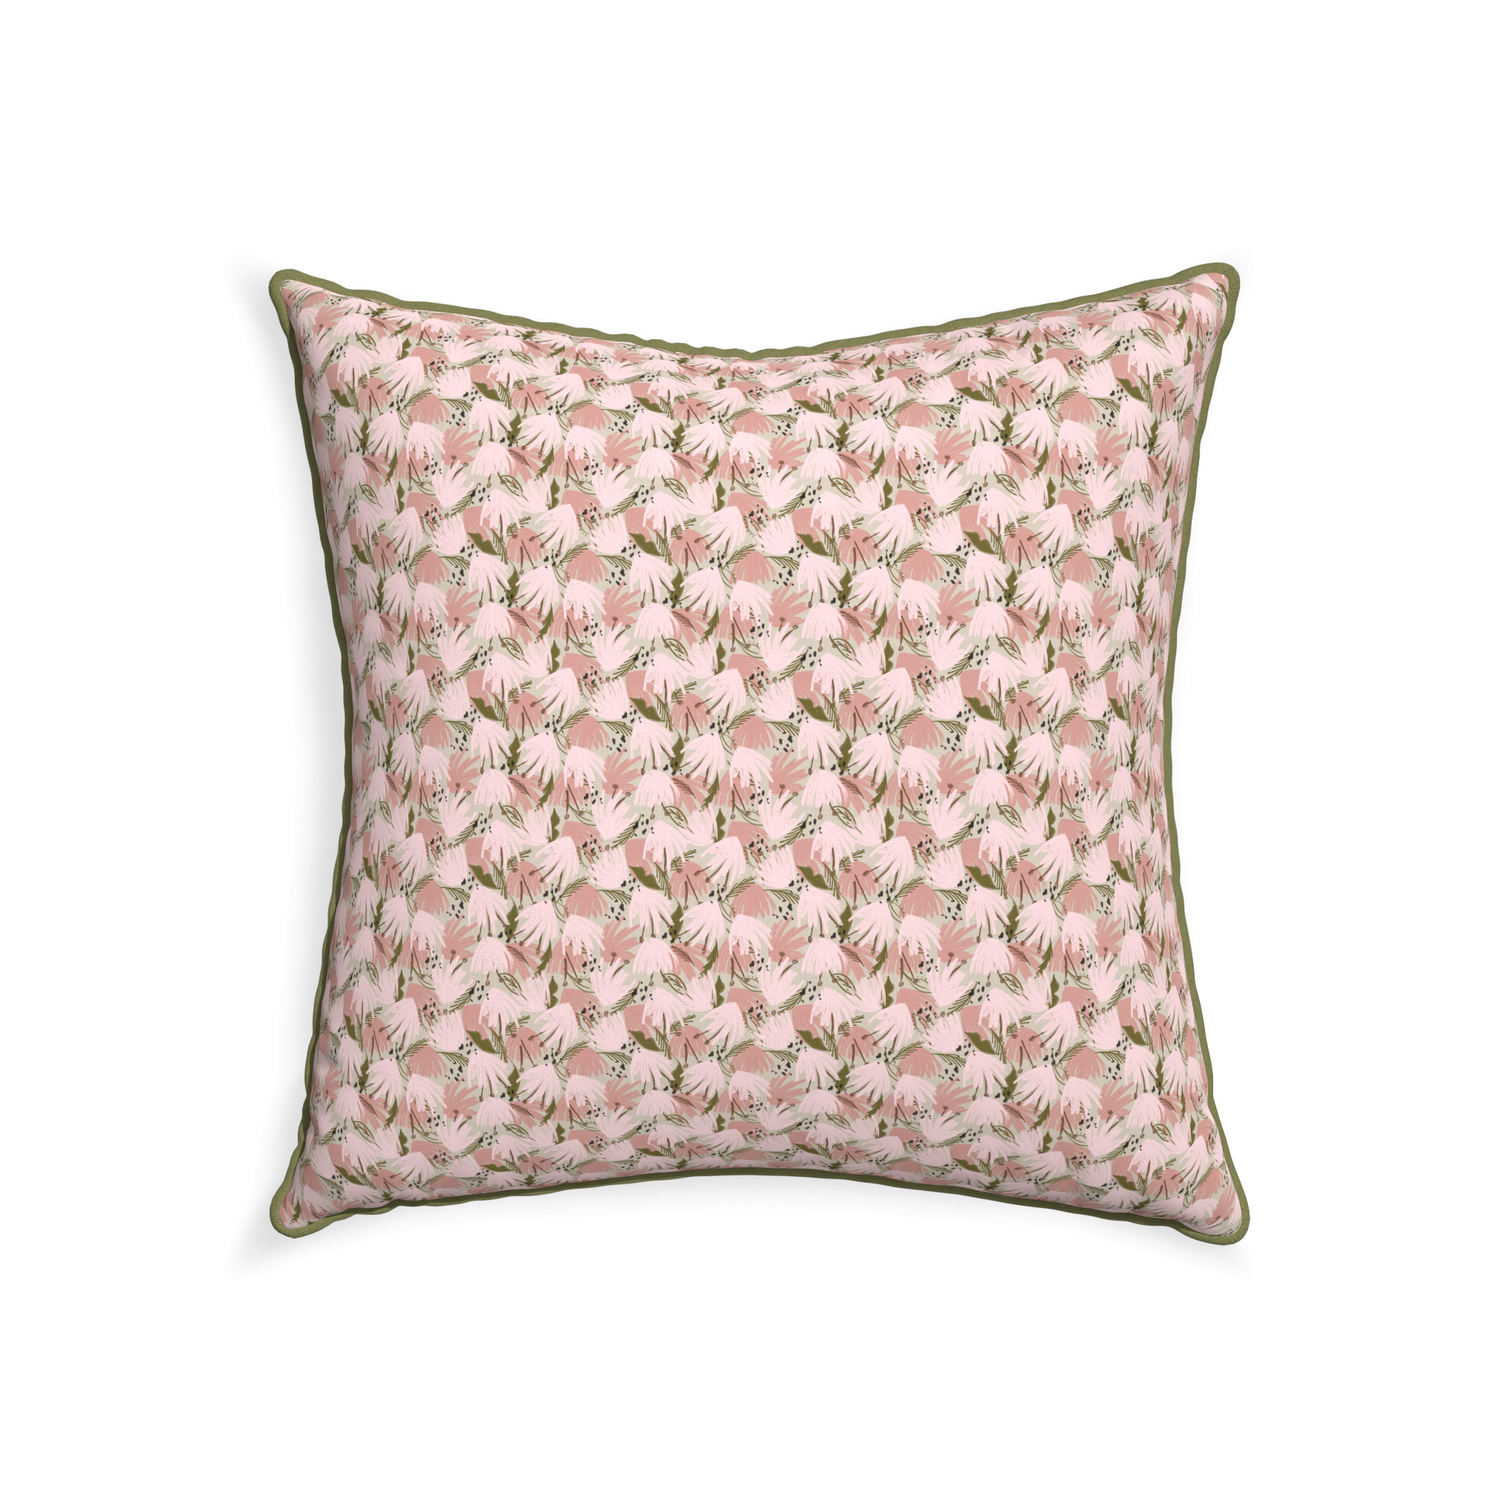 22-square eden pink custom pillow with moss piping on white background